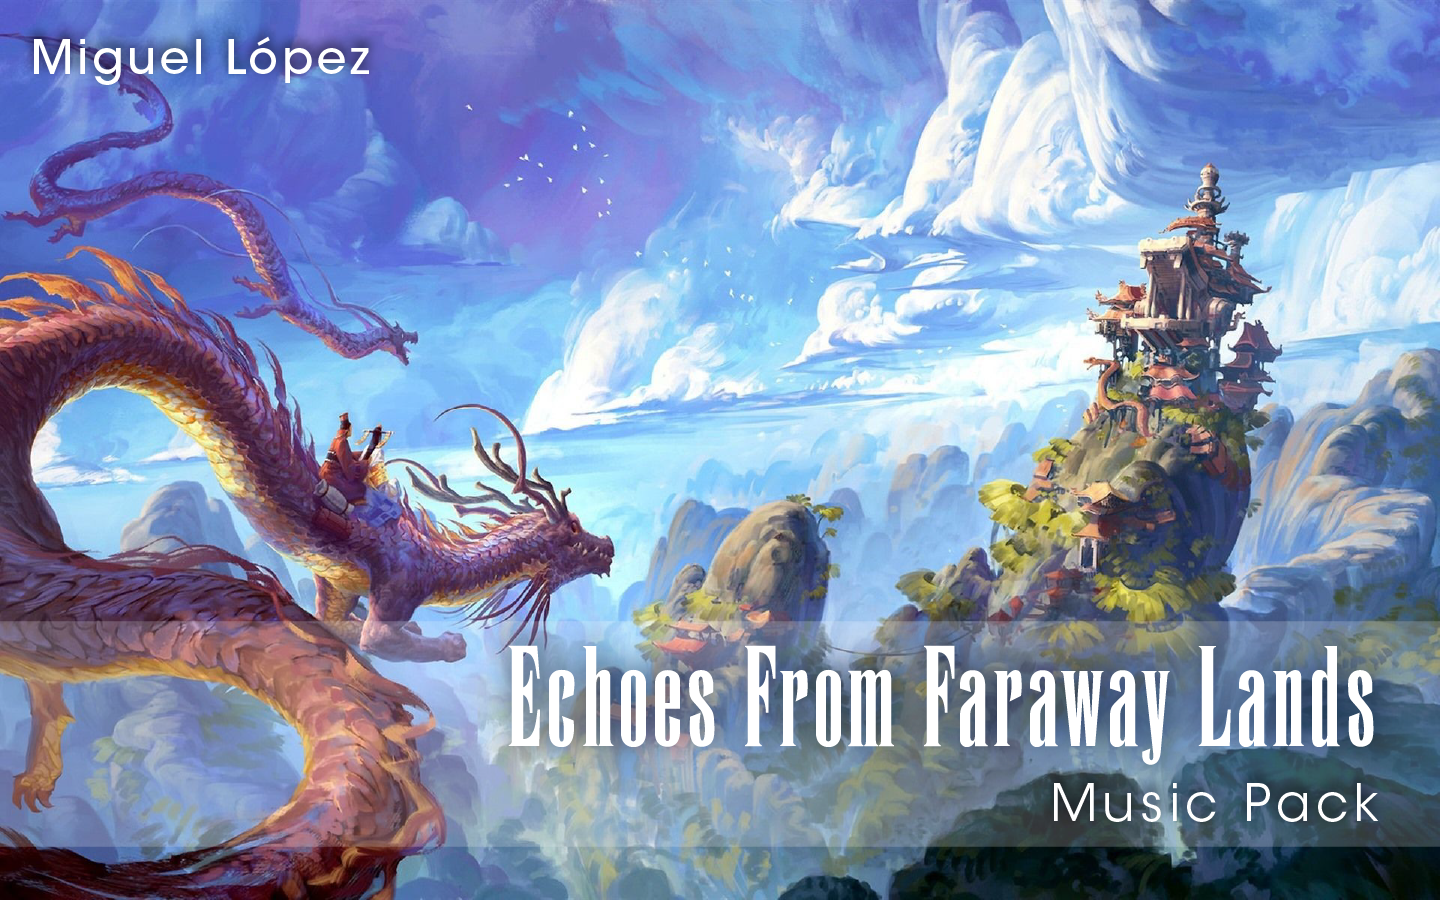 Echoes From Faraway Lands | 8-bit Original Music Pack